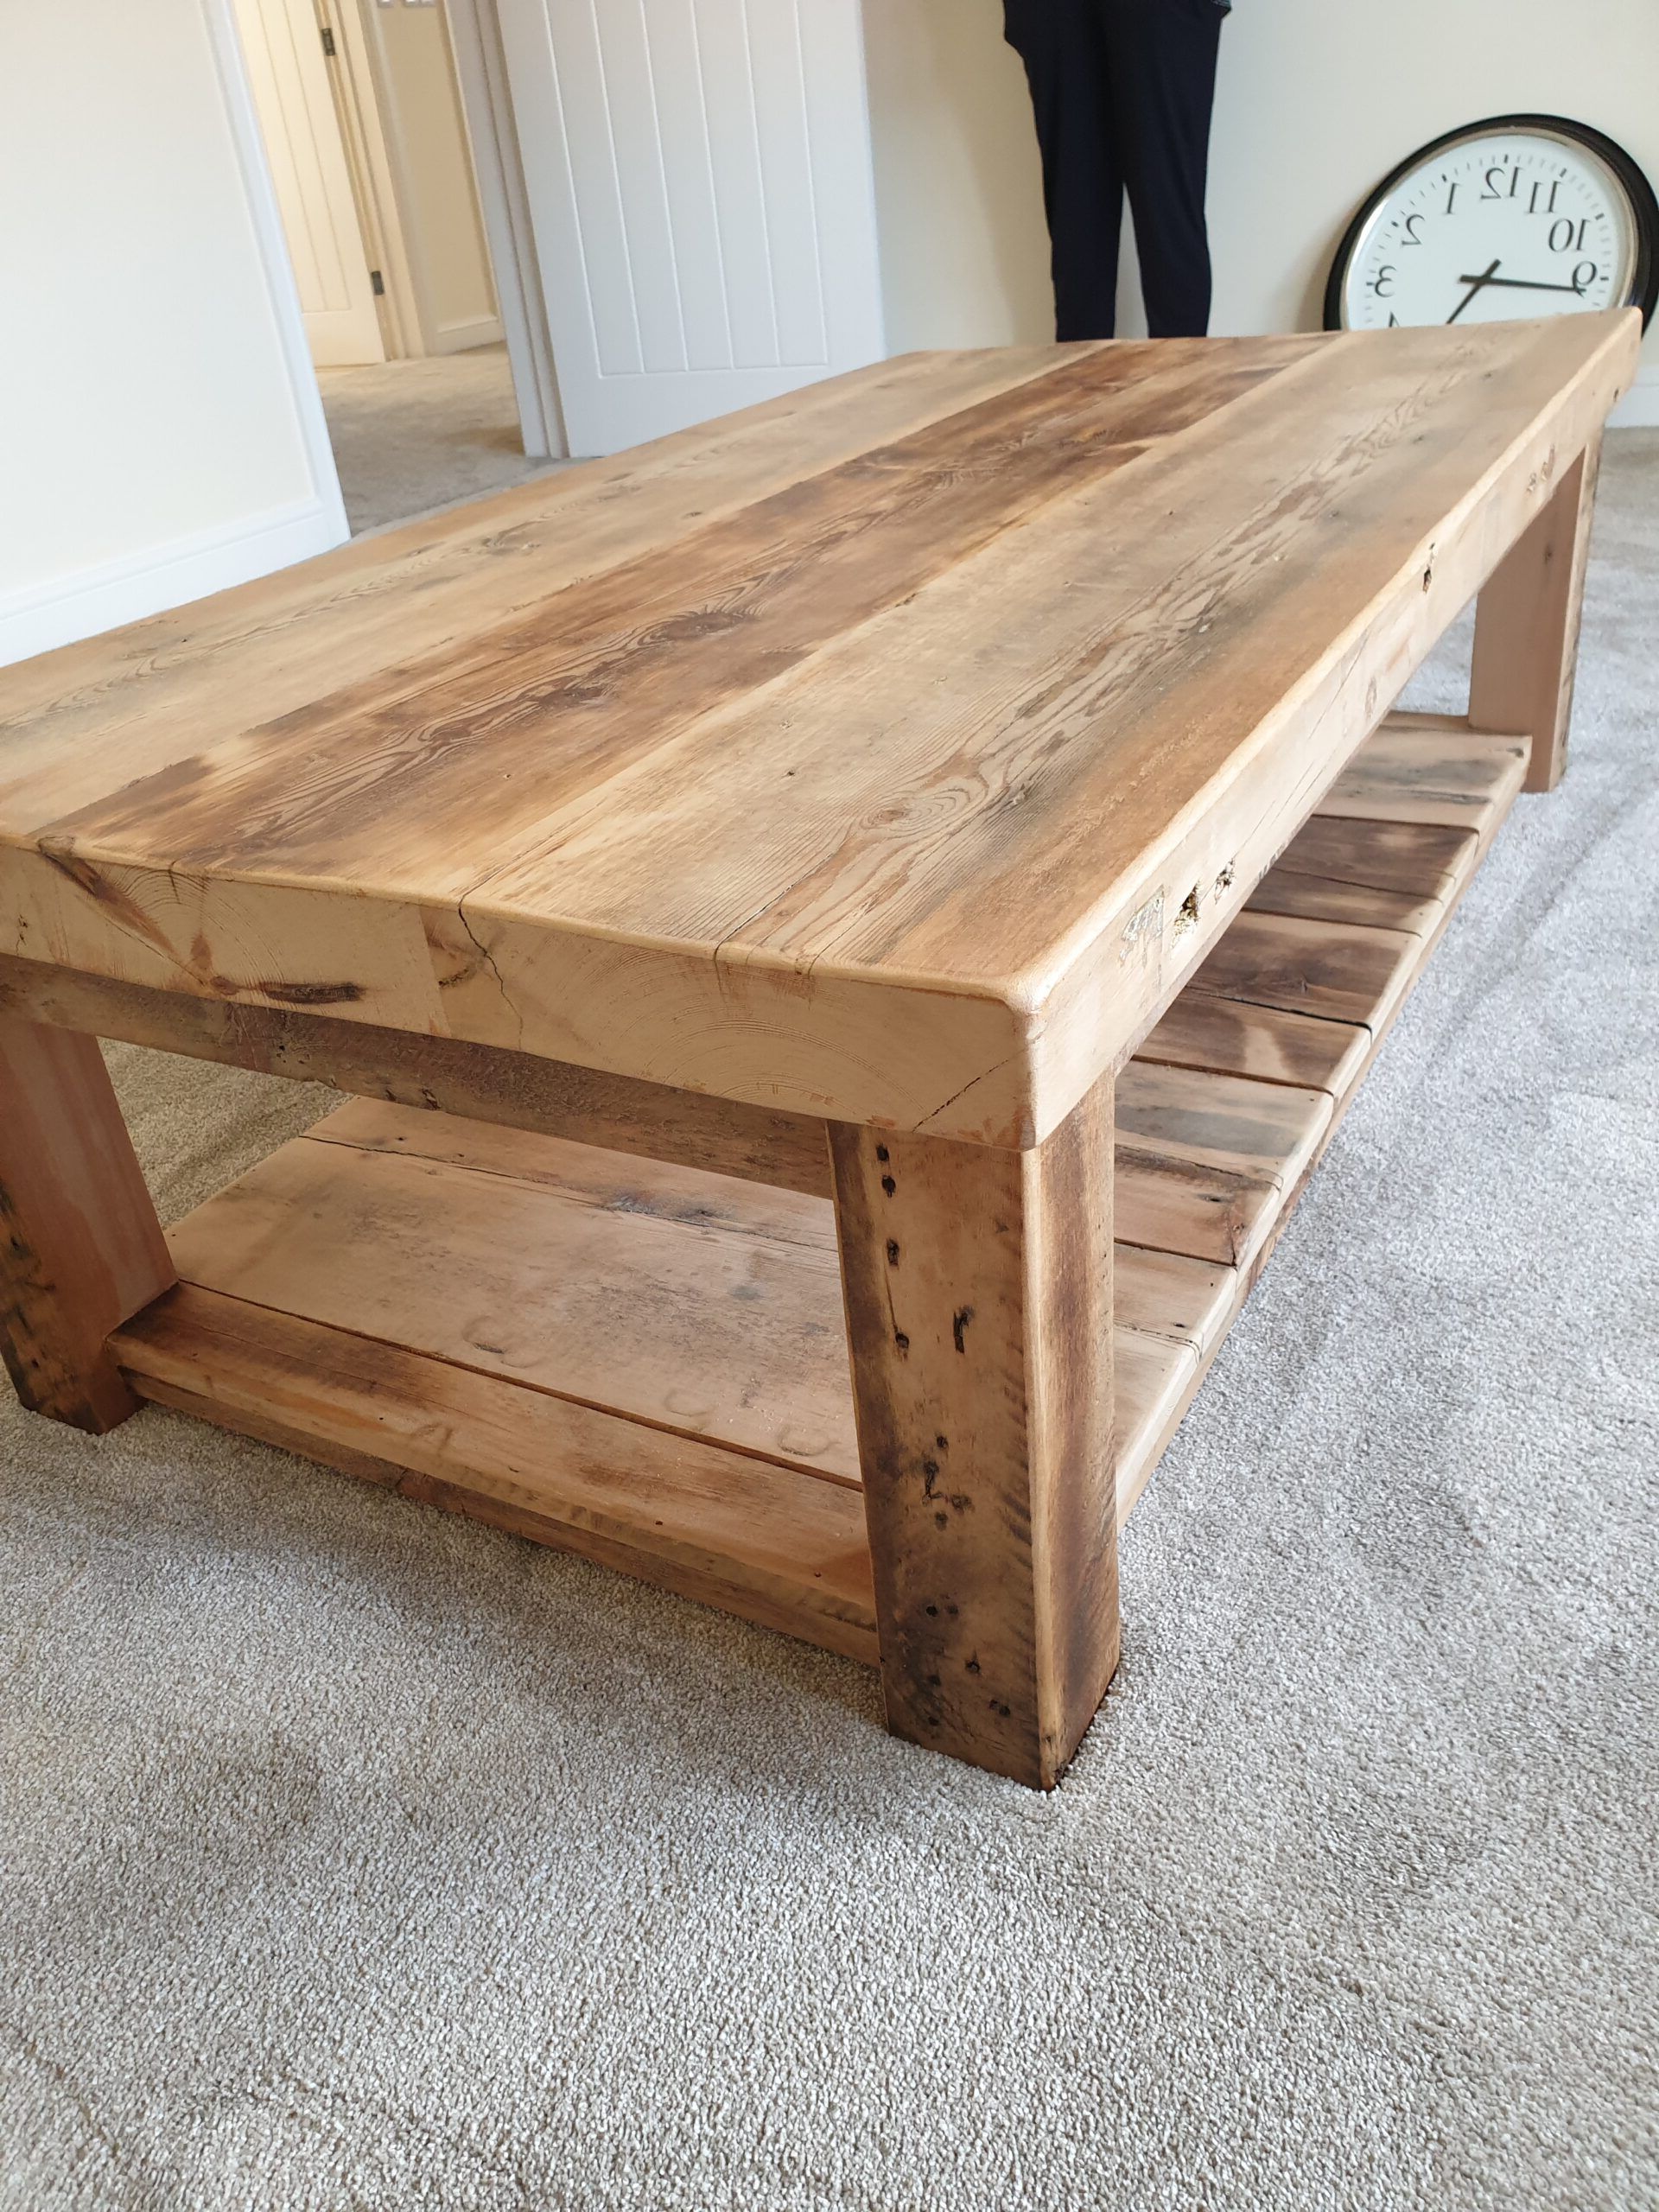 Buy Rustic Wood Coffee Table Made From Reclaimed Timber In Rustic Wood Coffee Tables (Gallery 2 of 20)